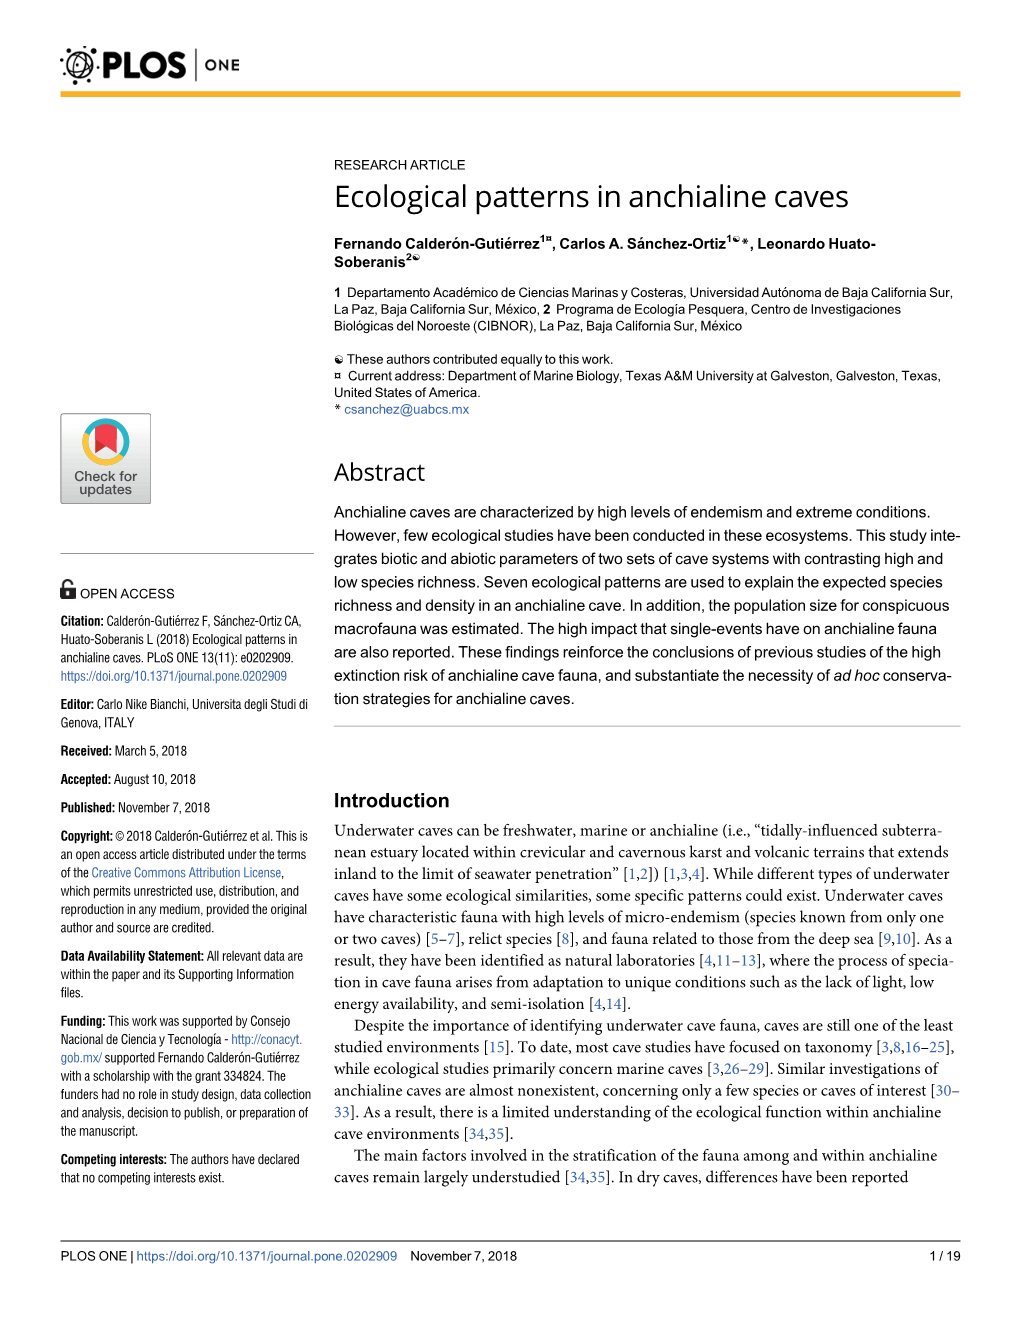 Ecological Patterns in Anchialine Caves